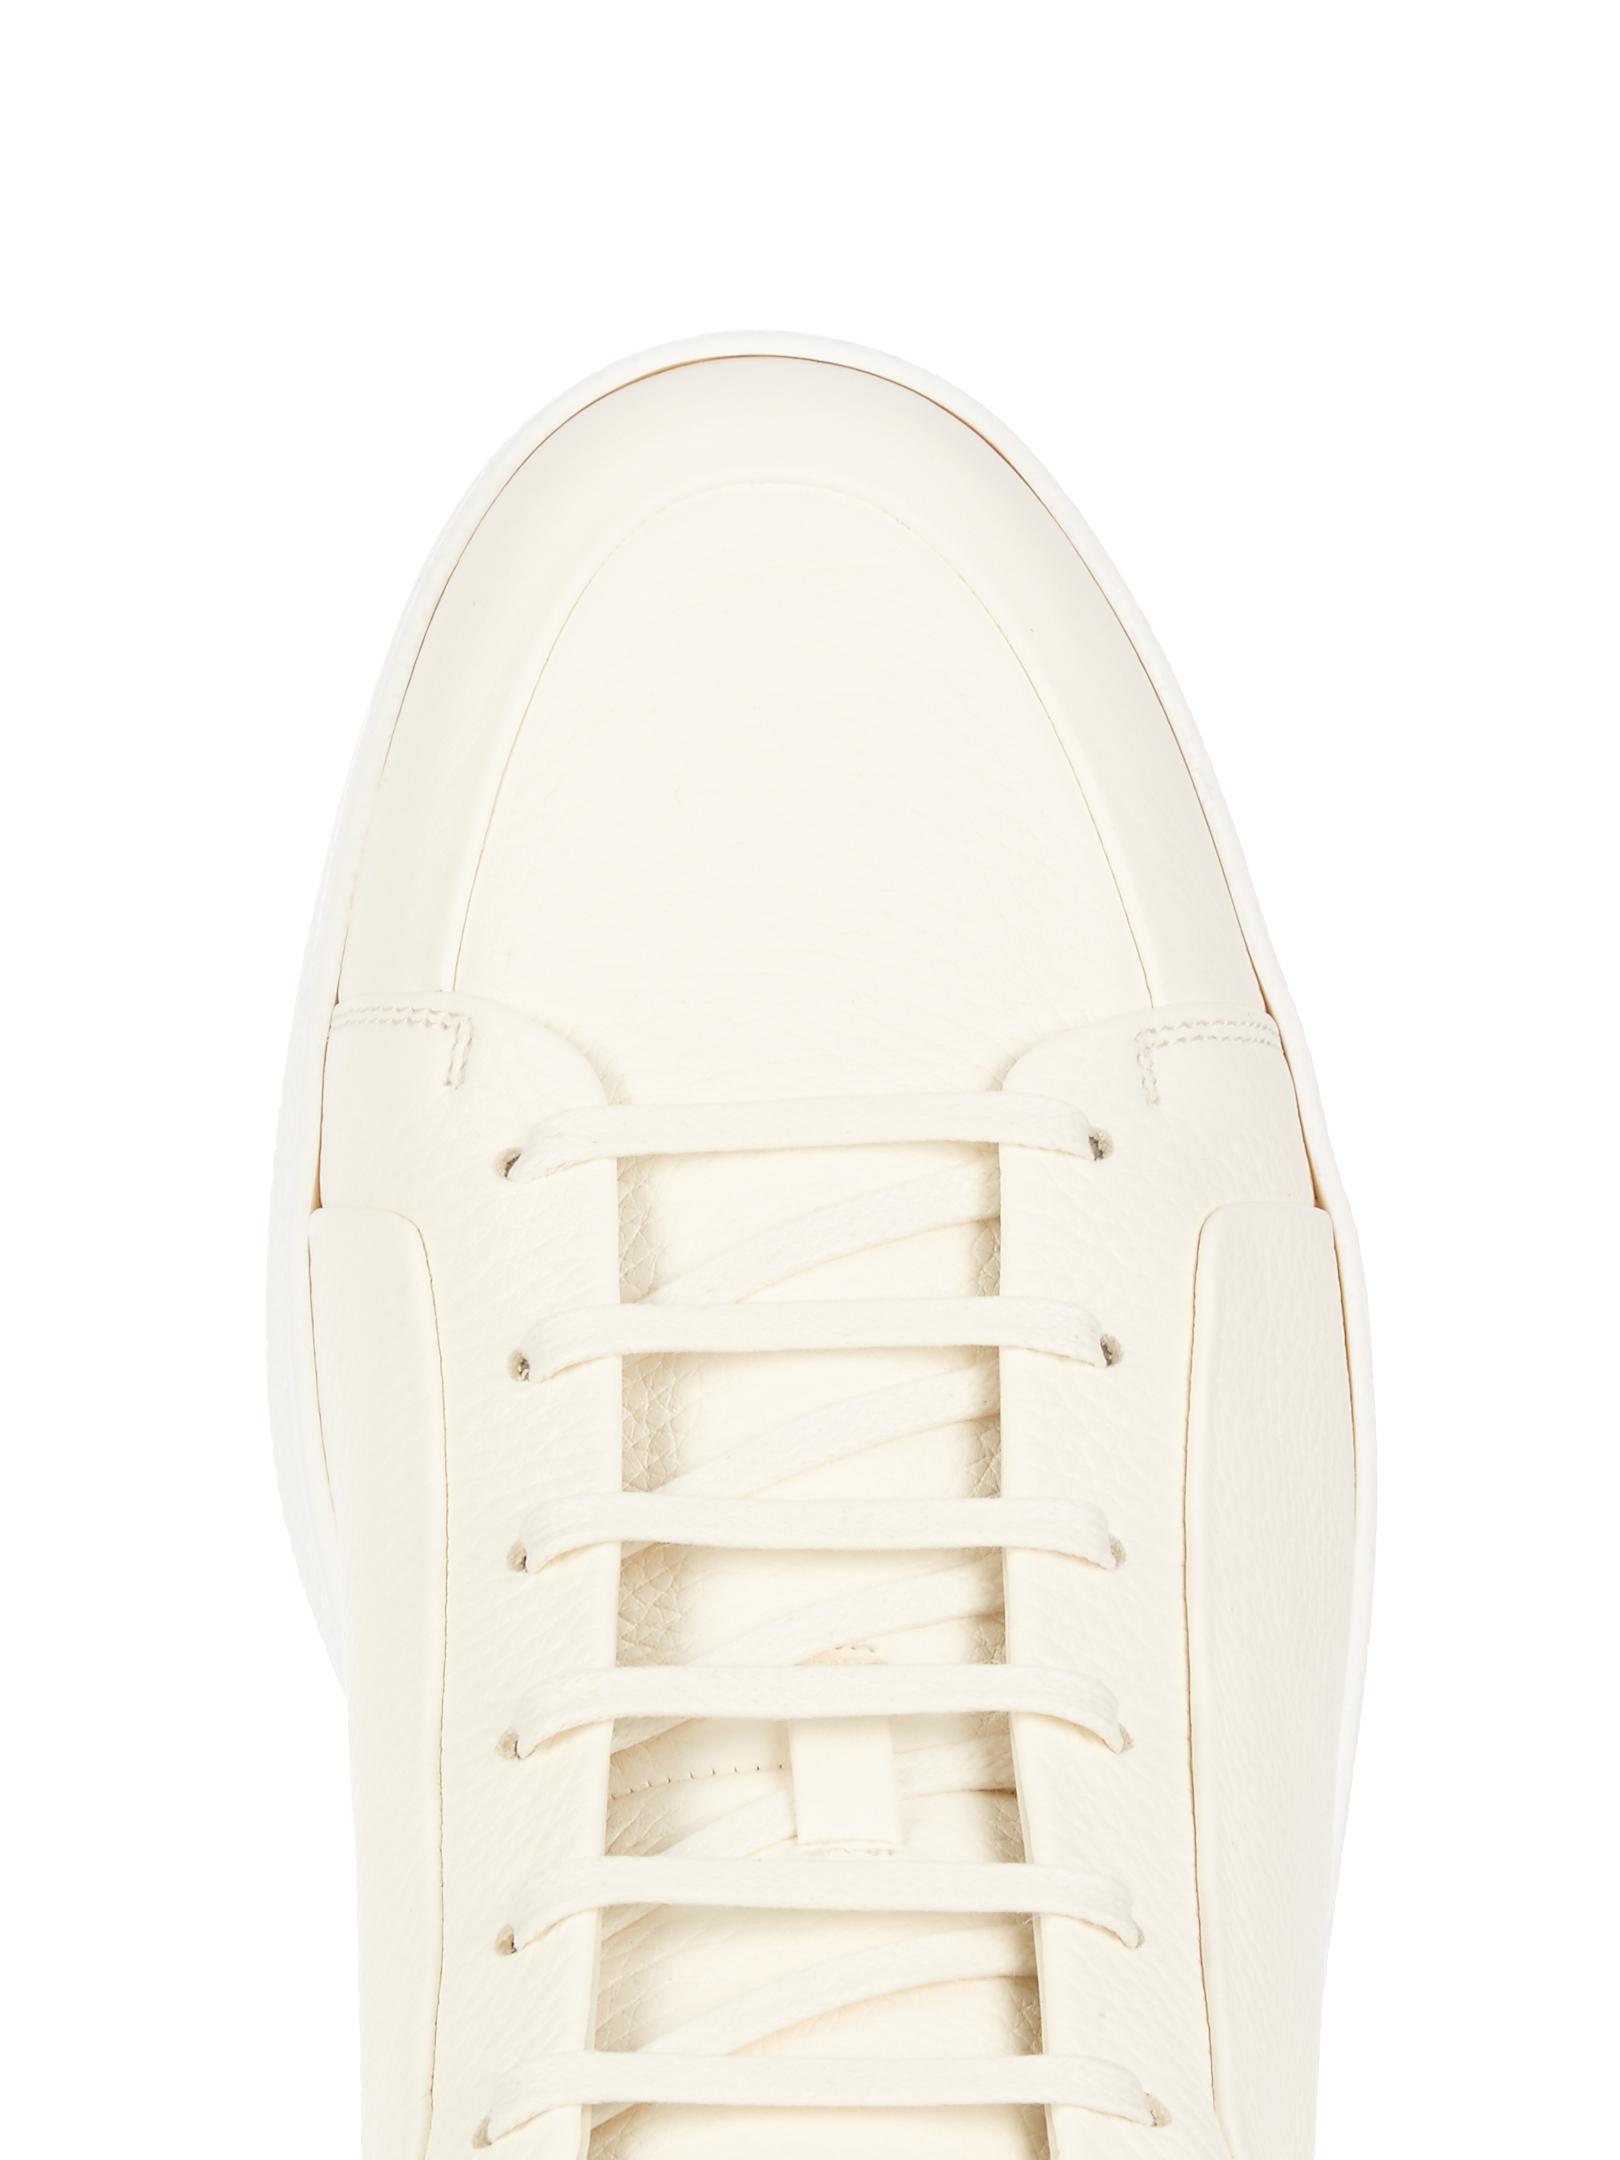 Balenciaga Urban Low-top Leather Trainers in White for Men | Lyst